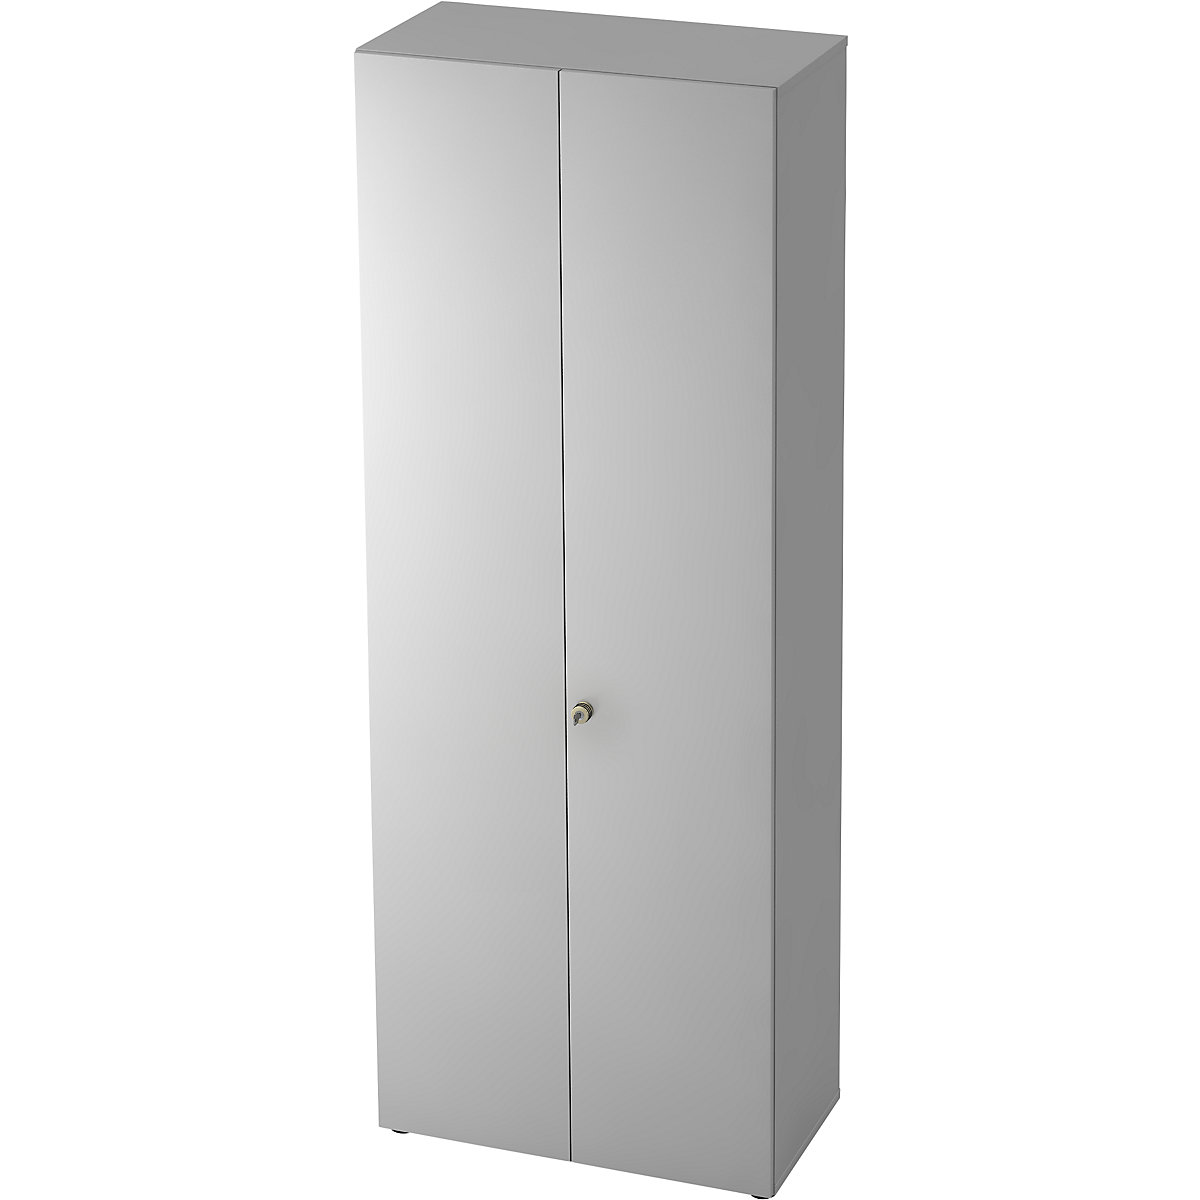 Cloakroom locker with acoustic rear panel ANNY-AC